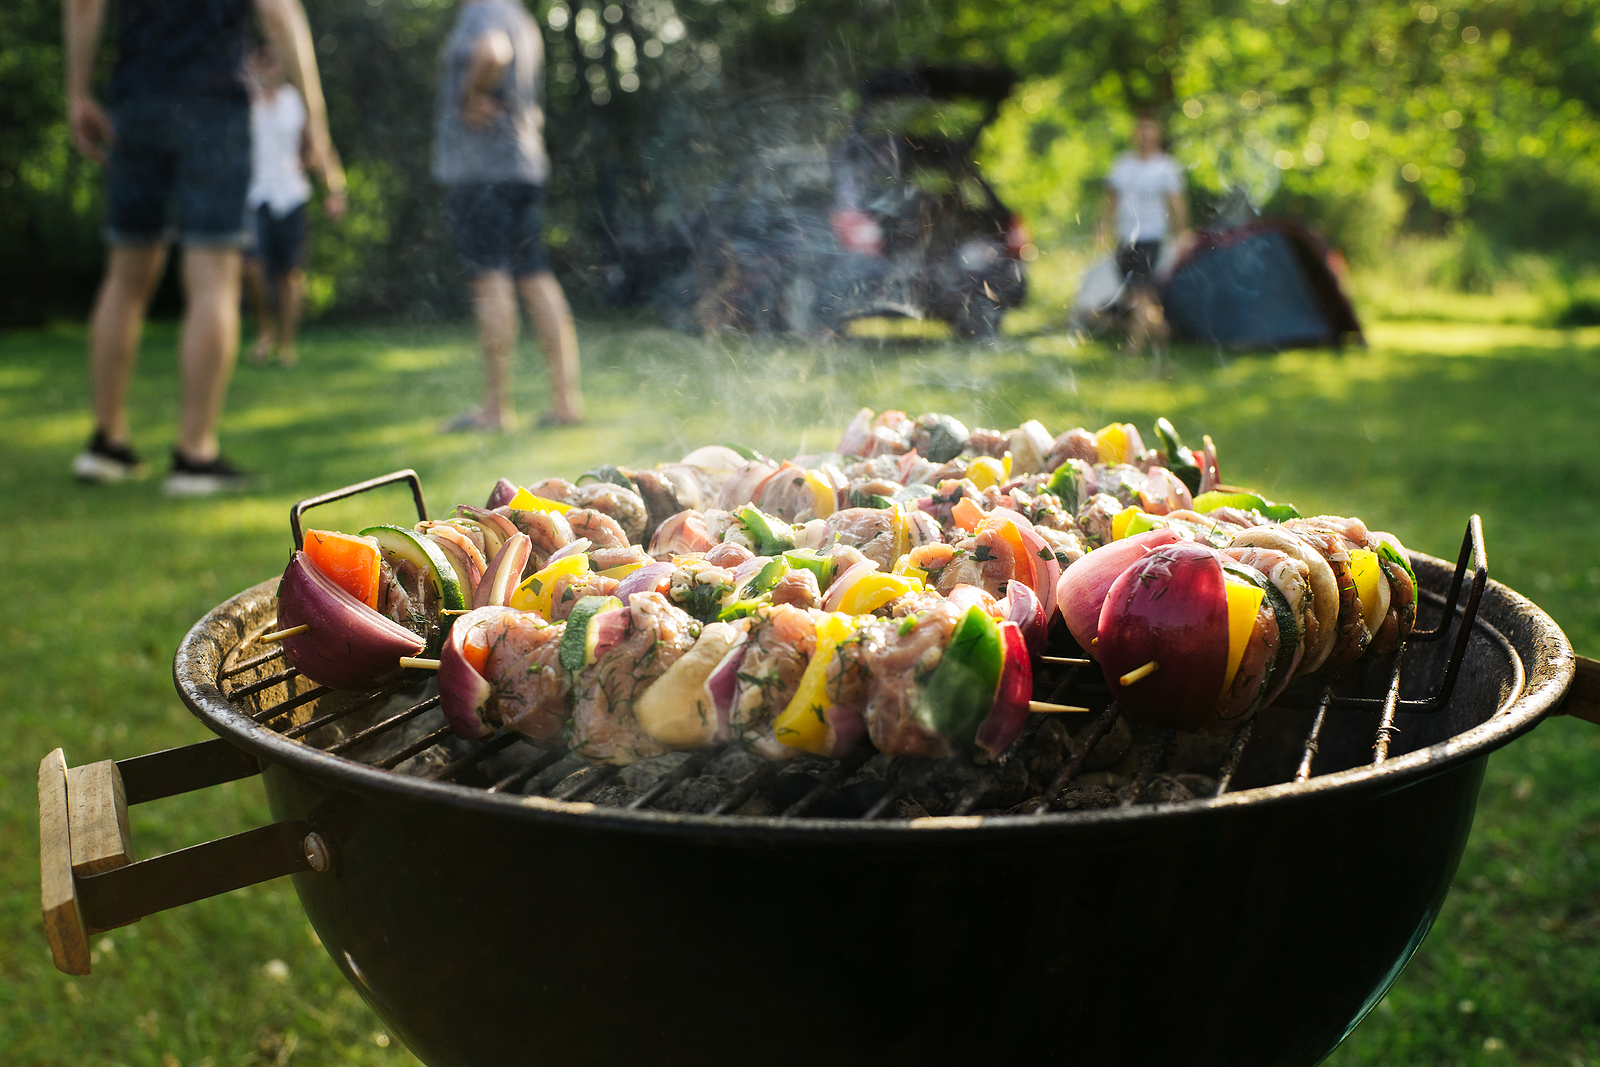 Shashlik barbecue. Wooden sticks with vegetable and meat. Chicken, pork, onion and bell pepper slices. Grilling food on a picnic. BBQ while camping with friends background. Family dinner outdoor.